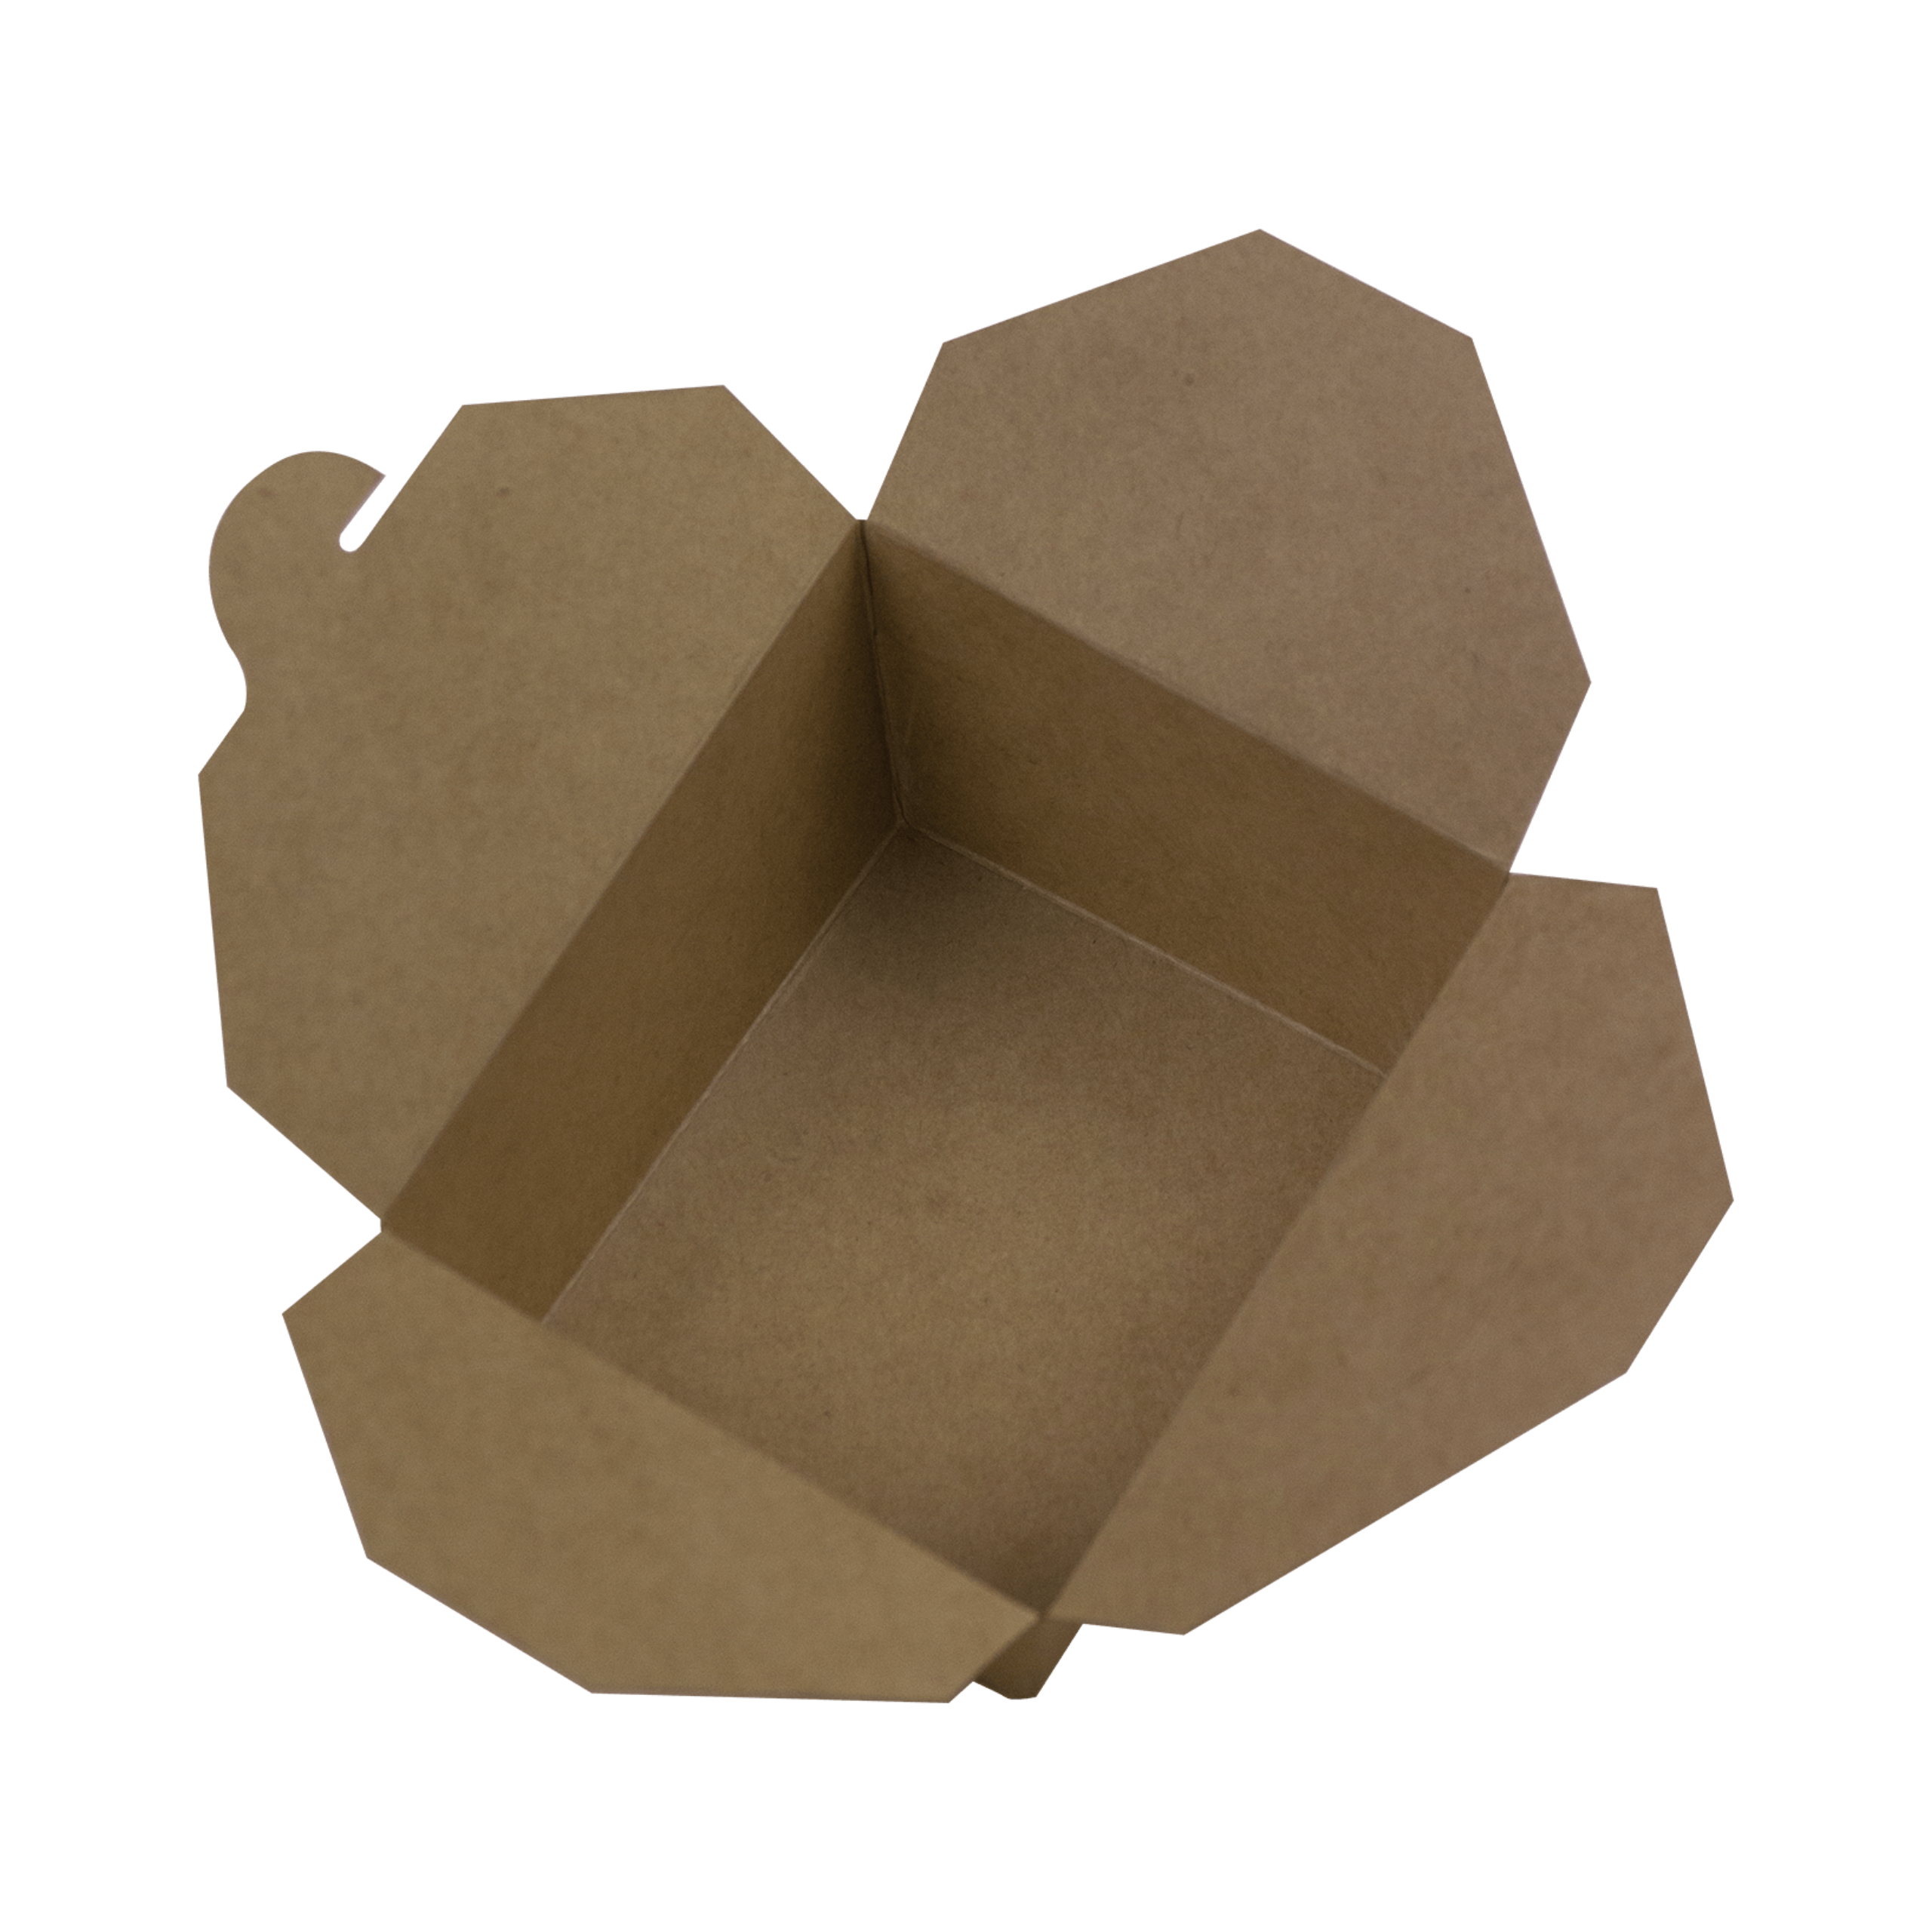 Bionature 19055 - #1 Take-Out Box - Case of 450